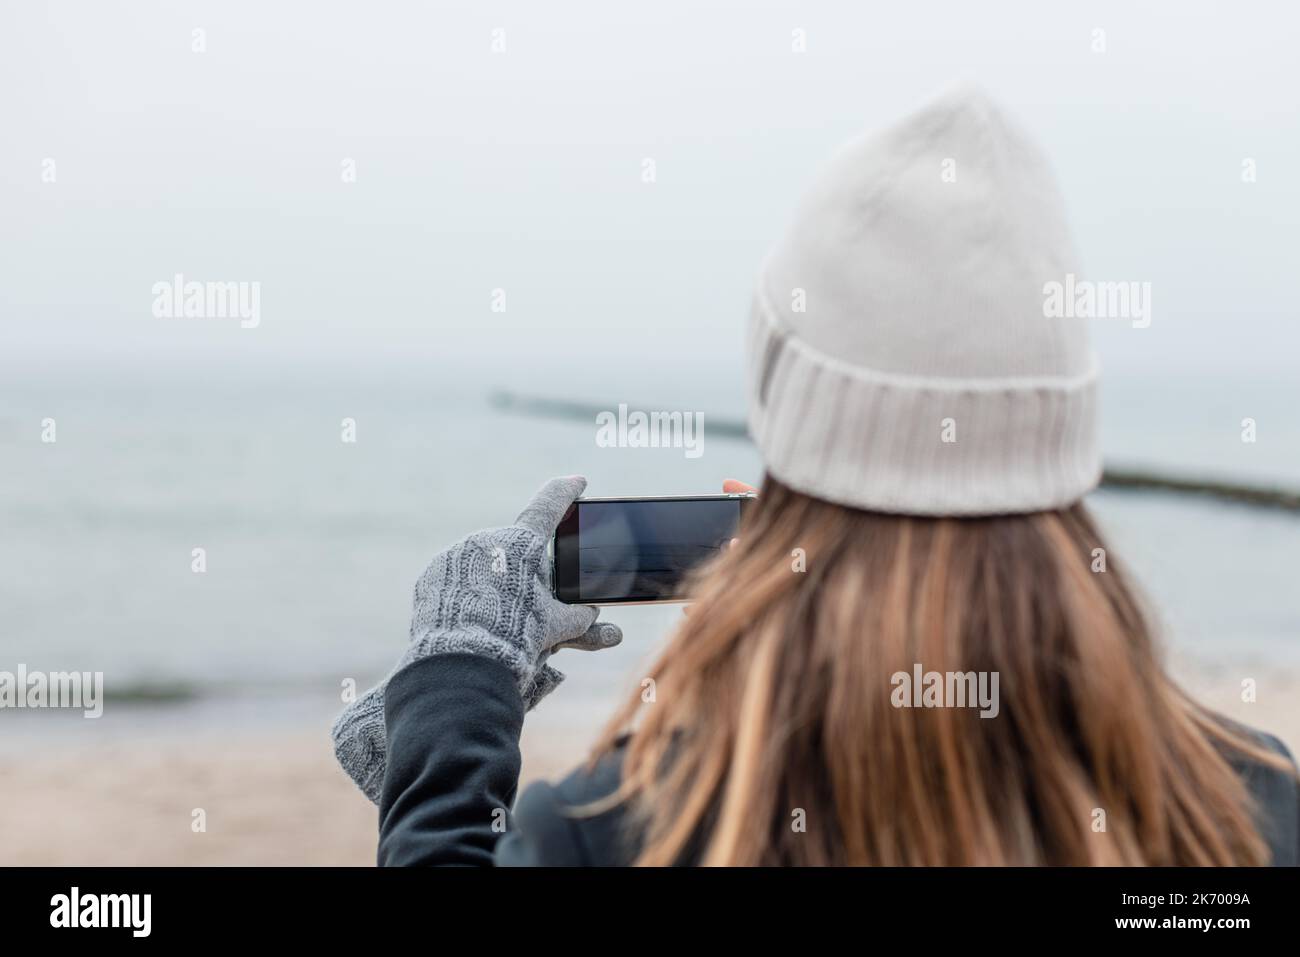 Woman taking picture on beach in winter Stock Photo